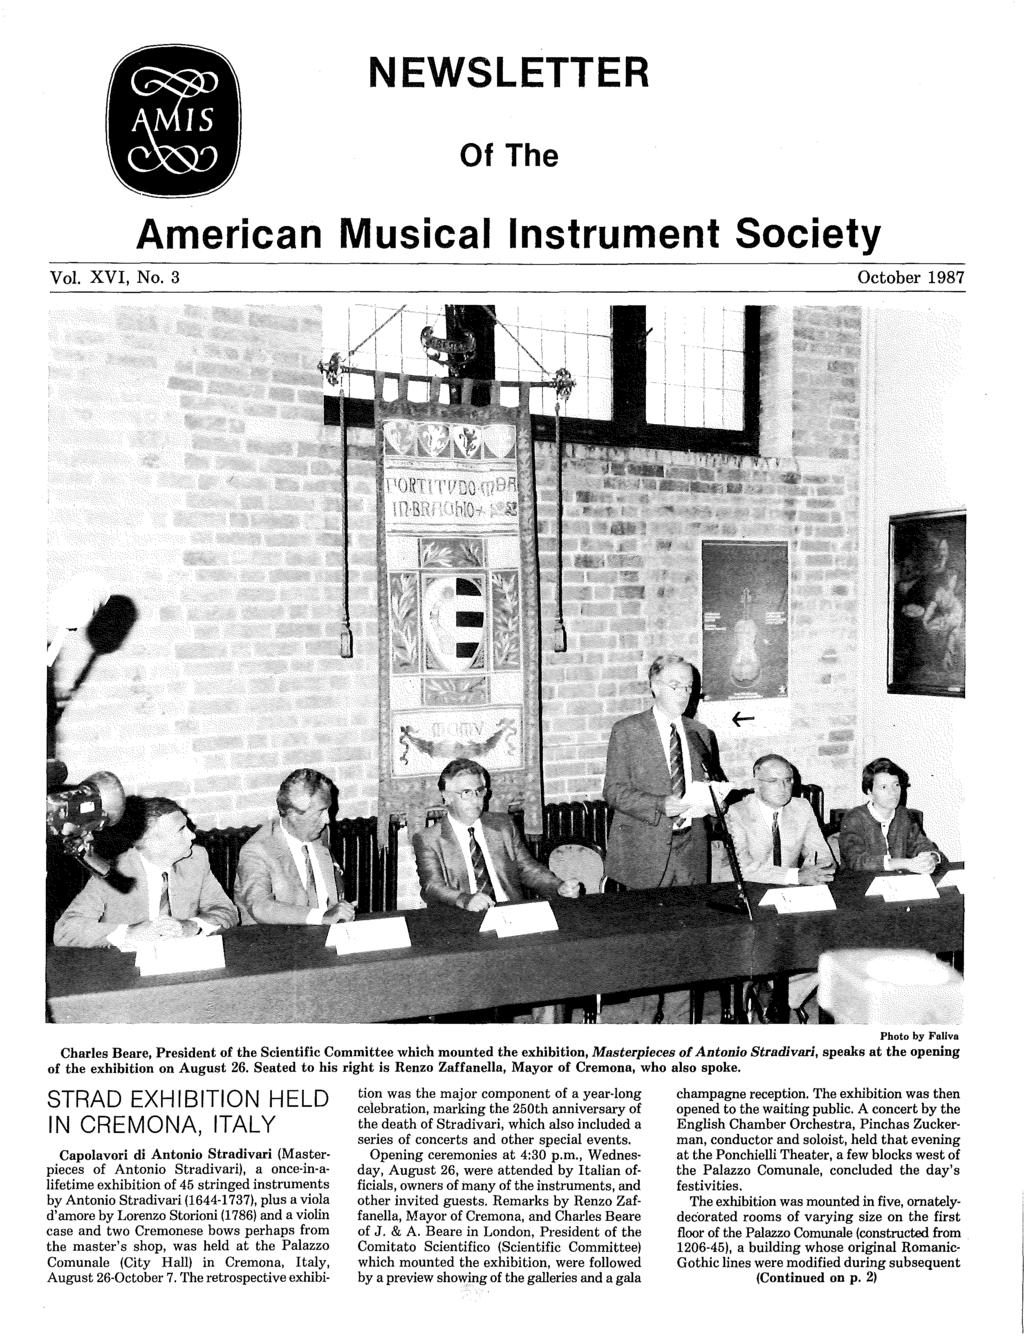 NEWSLETTER Of The American Musical Instrument Society Vol. XVI, No.